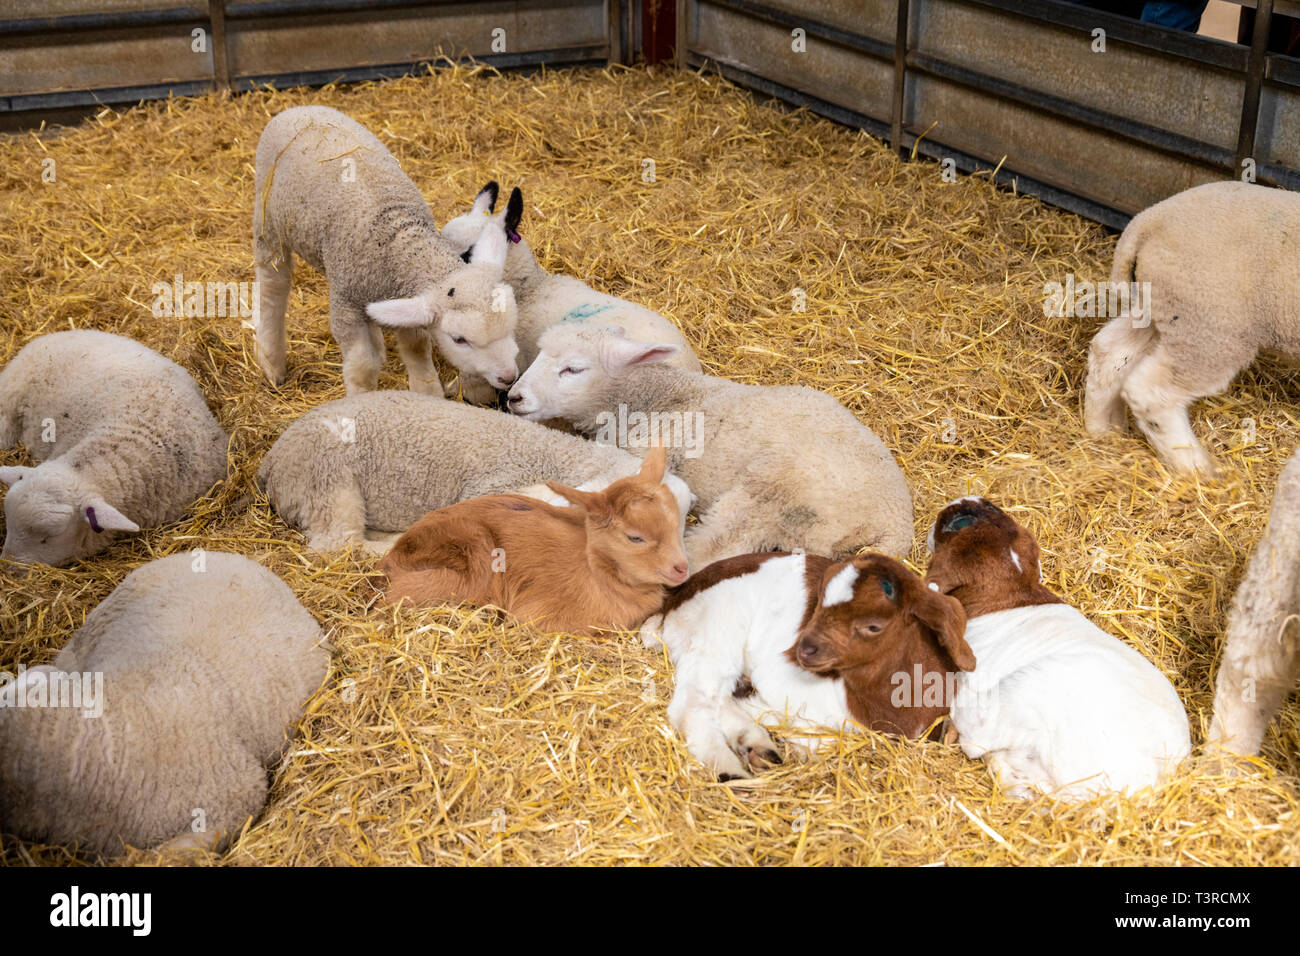 Young lambs and kids at Cotswold Farm Park, Kineton, Gloucestershire UK Stock Photo